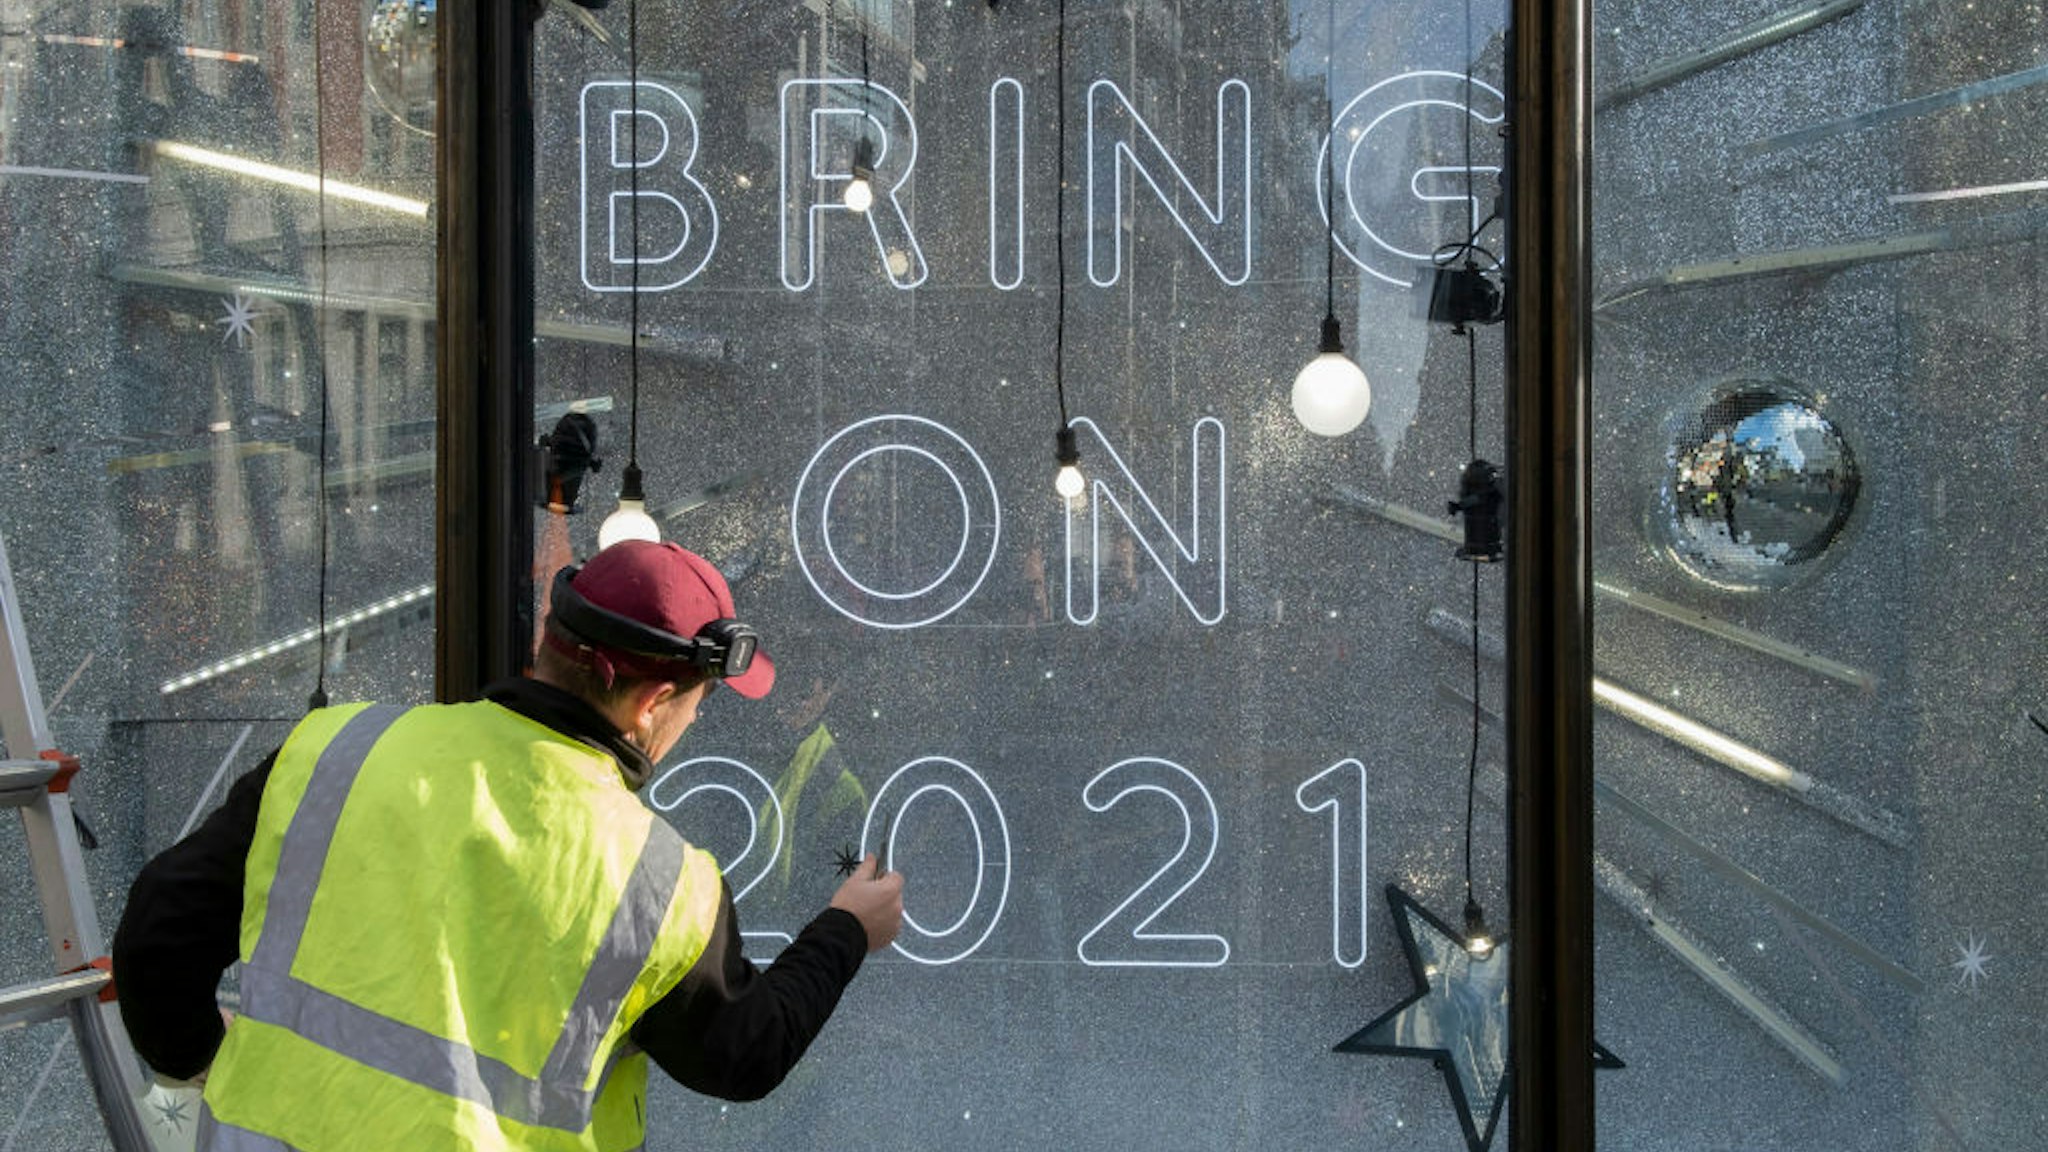 After a bleak year of Coronavirus pandemic misery, a contractor applies stars to window glass in Harvey Nichols's Christmas-themed window which urges Londoners to be optimistic for the coming year, on 13th November 2020, in London, England. (Photo by Richard Baker / In Pictures via Getty Images)